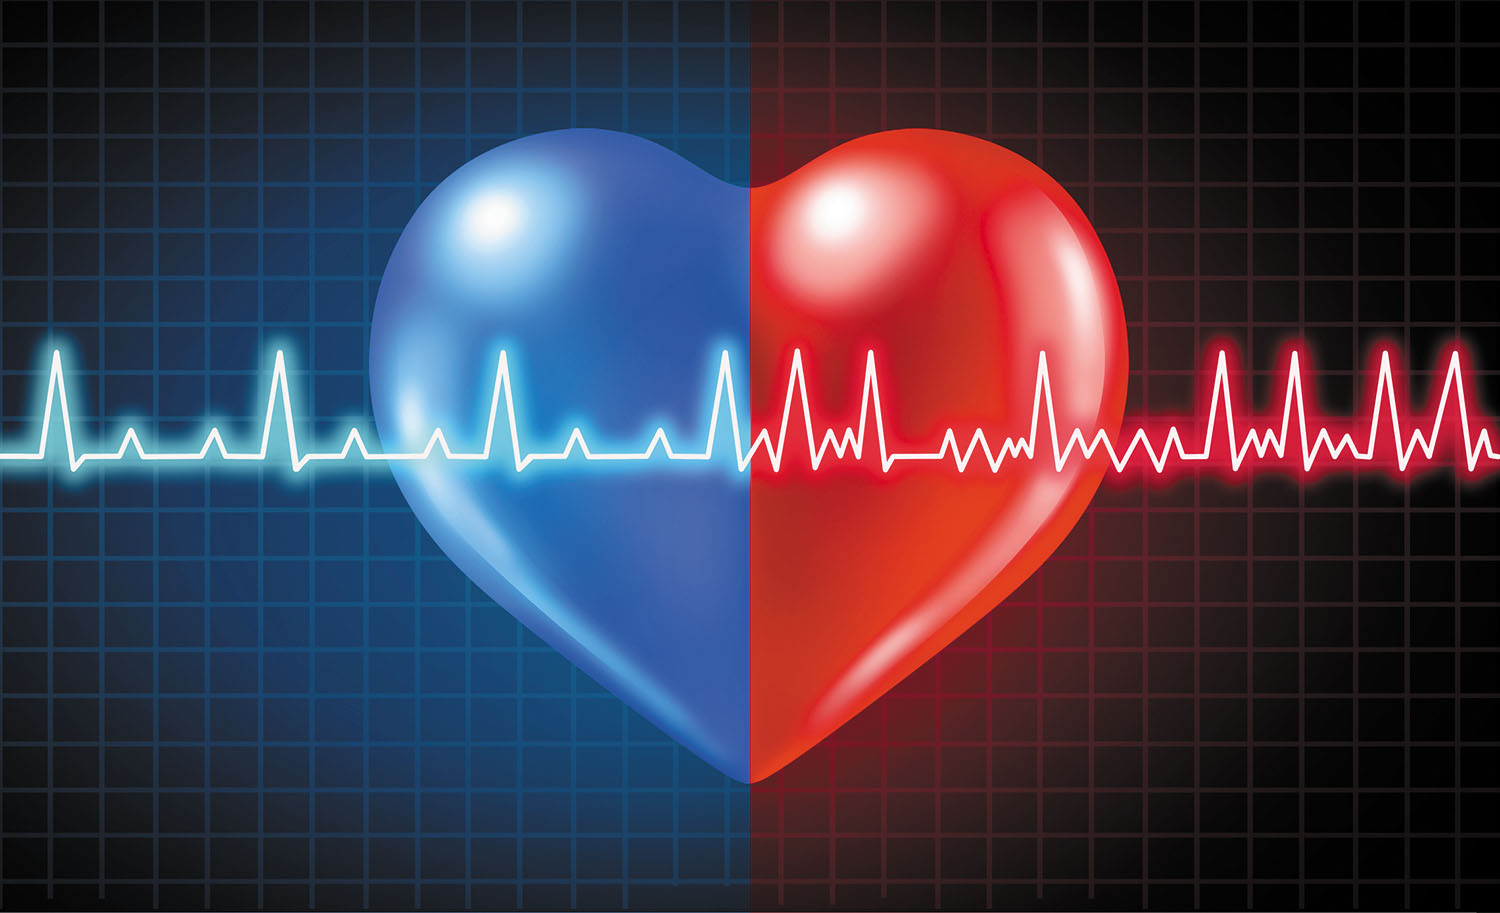 illustration of a three-dimensional heart shape divided into two halves: left half is blue and has a regular heart rhythm pattern superimposed over it; right half is red and has an irregular heart rhythm pattern over it; all against a black background